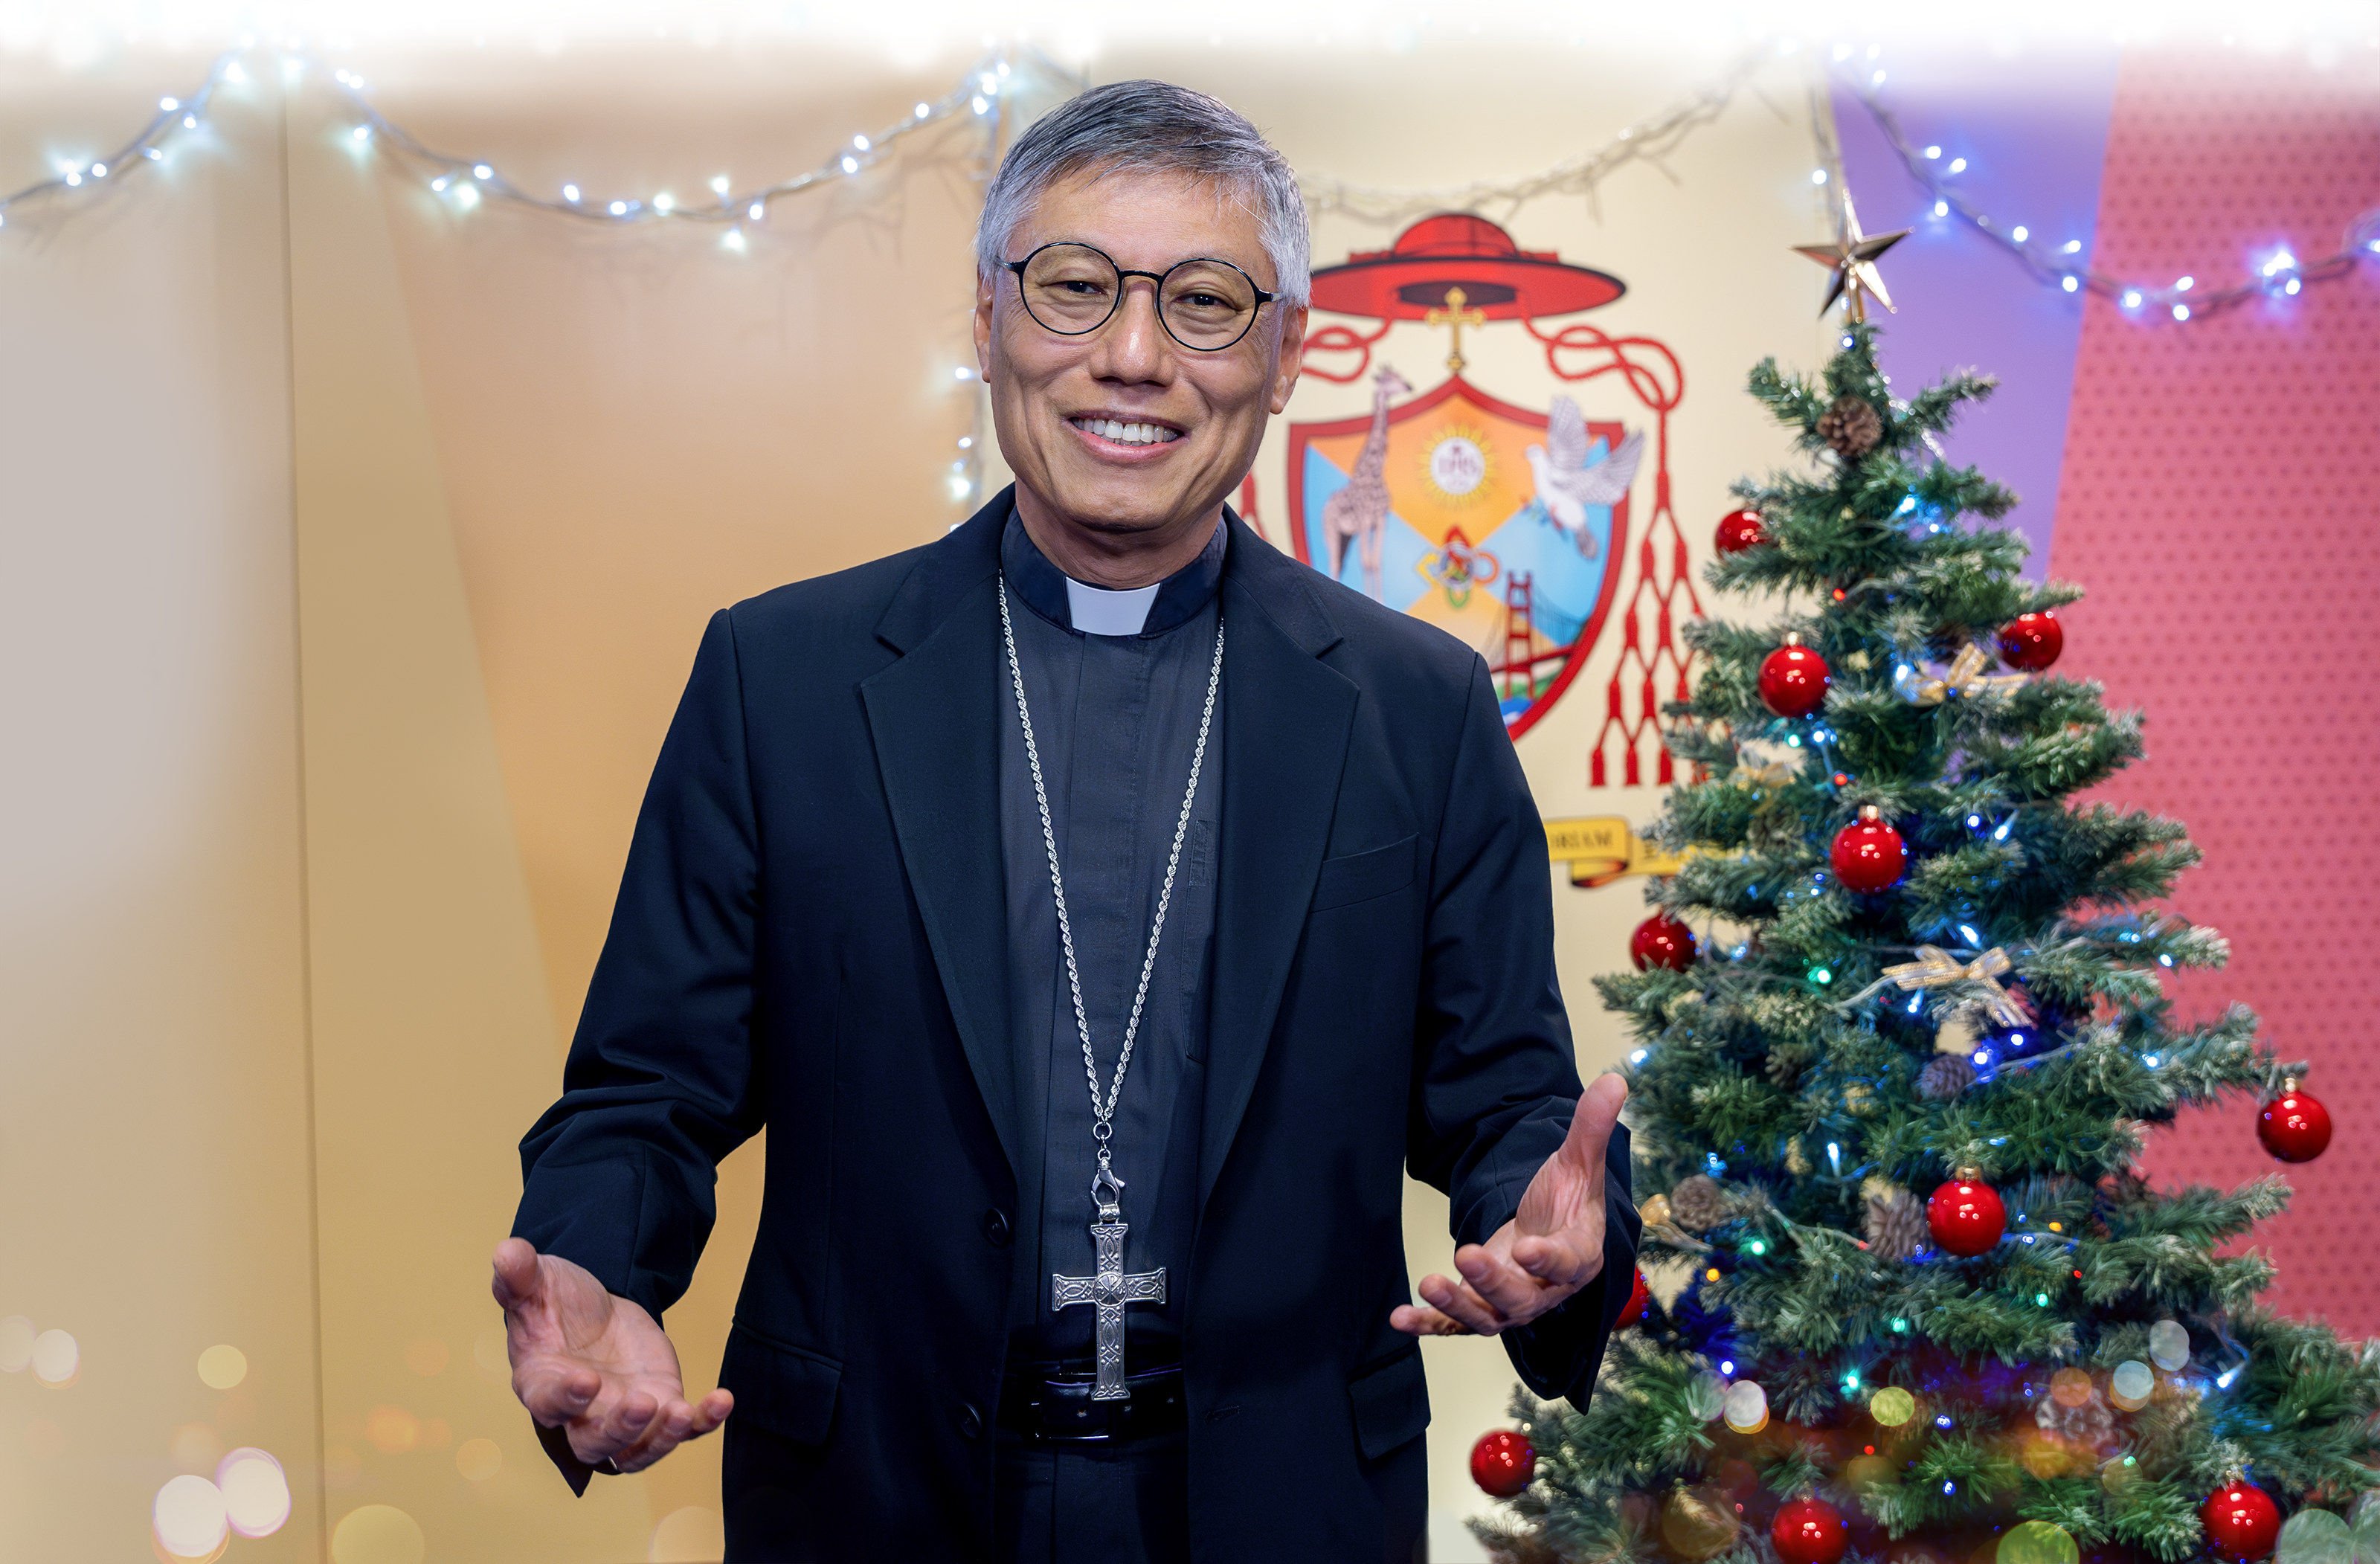 Cardinal Stephen Chow says Christmas is a time to remind people to be “faithful companions” to those who are struggling. Photo: Catholic diocese of Hong Kong